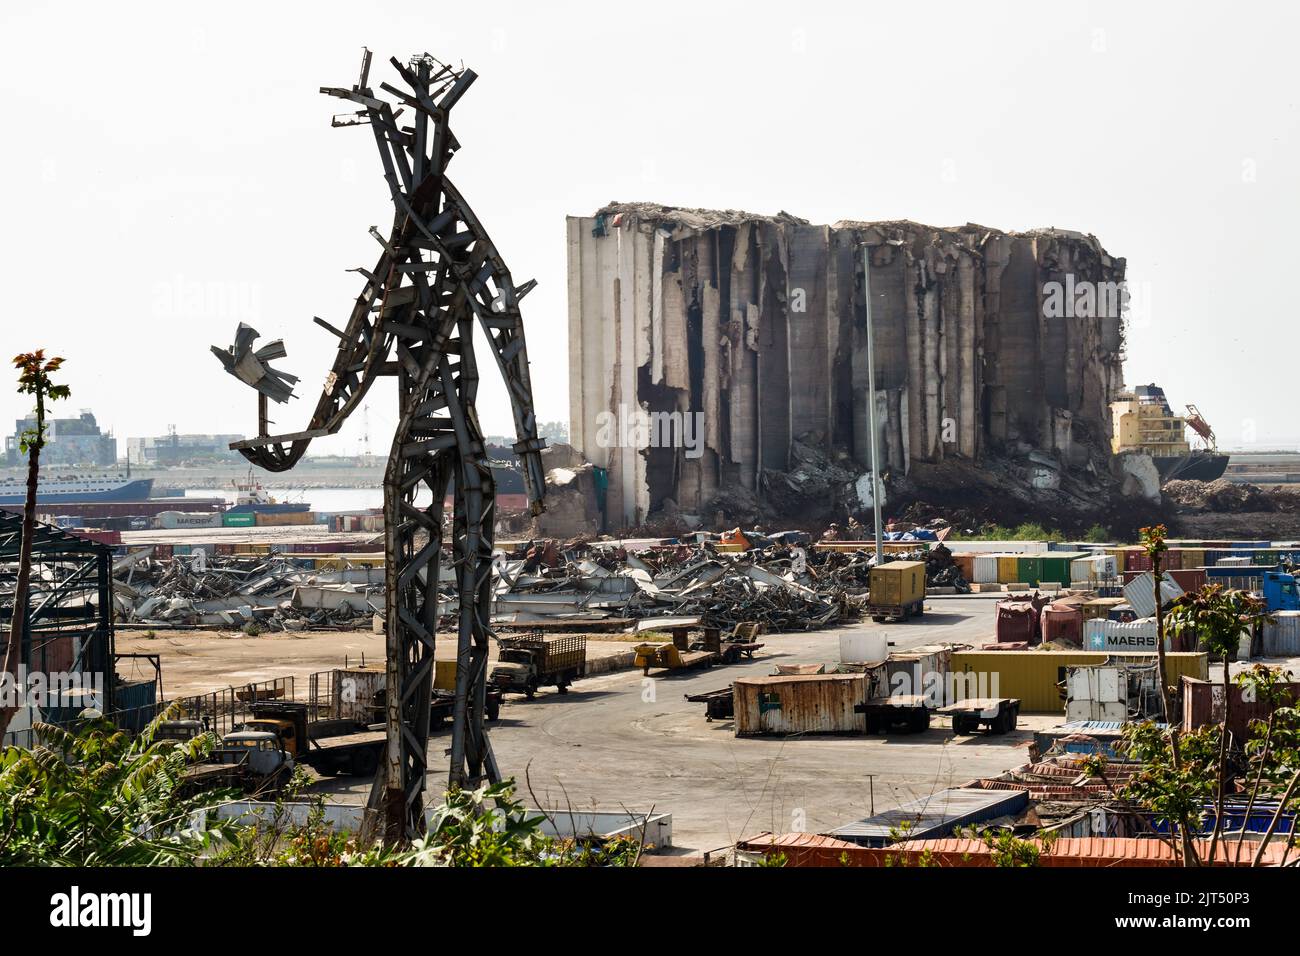 Beirut, Lebanon: In front of the destroyed grain silos stands artist Nadim Karam's steel sculpture commemorating the victims of the deadly explosion of August 4, 2020, made from the scrap metal from the massive explosion of 2,750 tons of ammonium nitrate stored in the port. Stock Photo